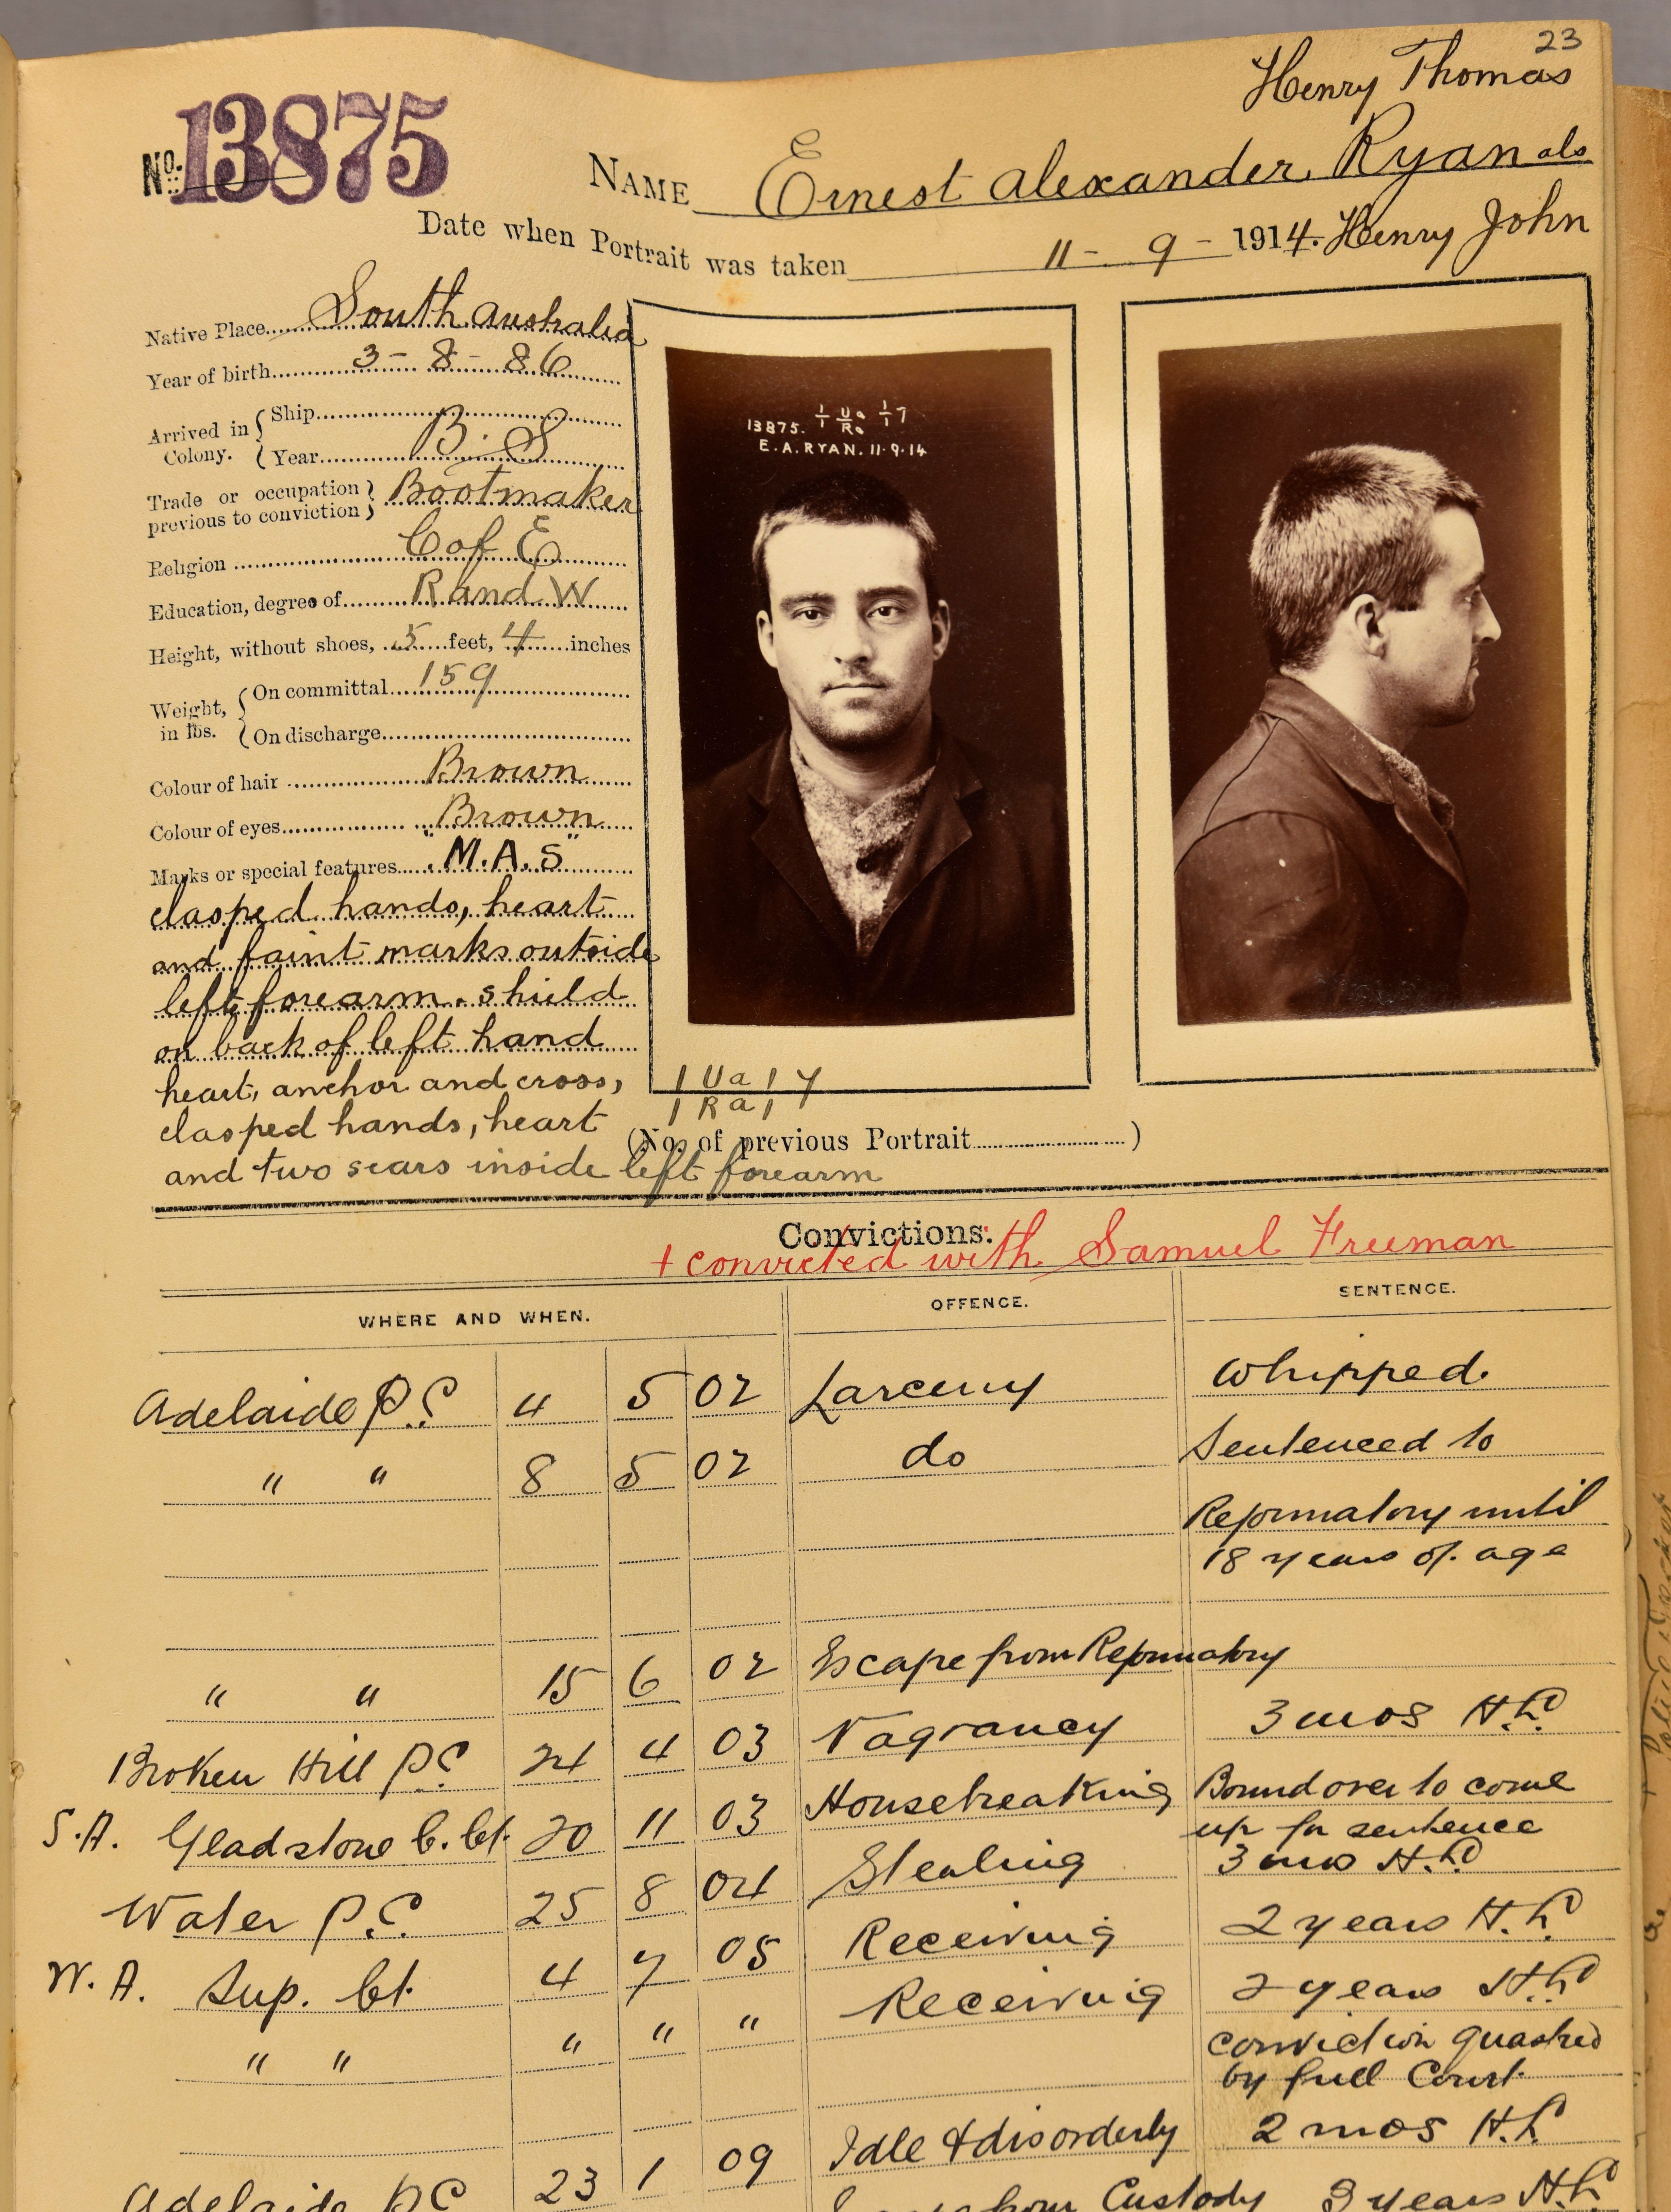 Gaol photo and description for Ernest Alexander Ryan dated 1914